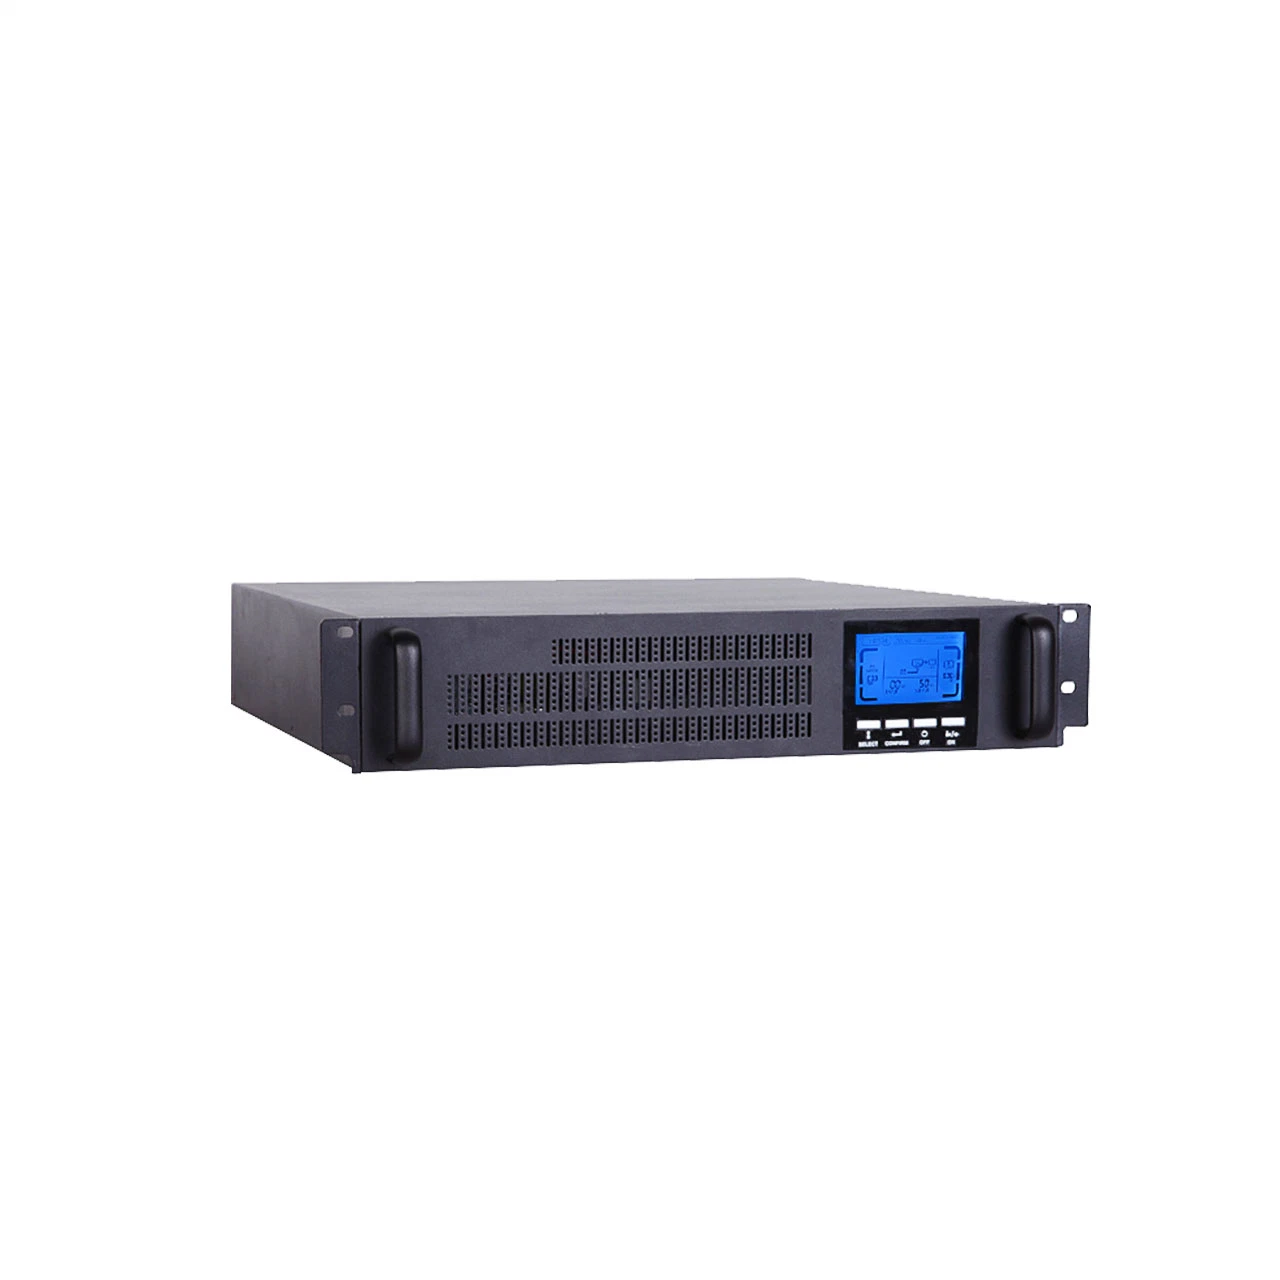 10kVA Rack-Mount High Frequency LCD Display Double Conversion Online Transformerless UPS